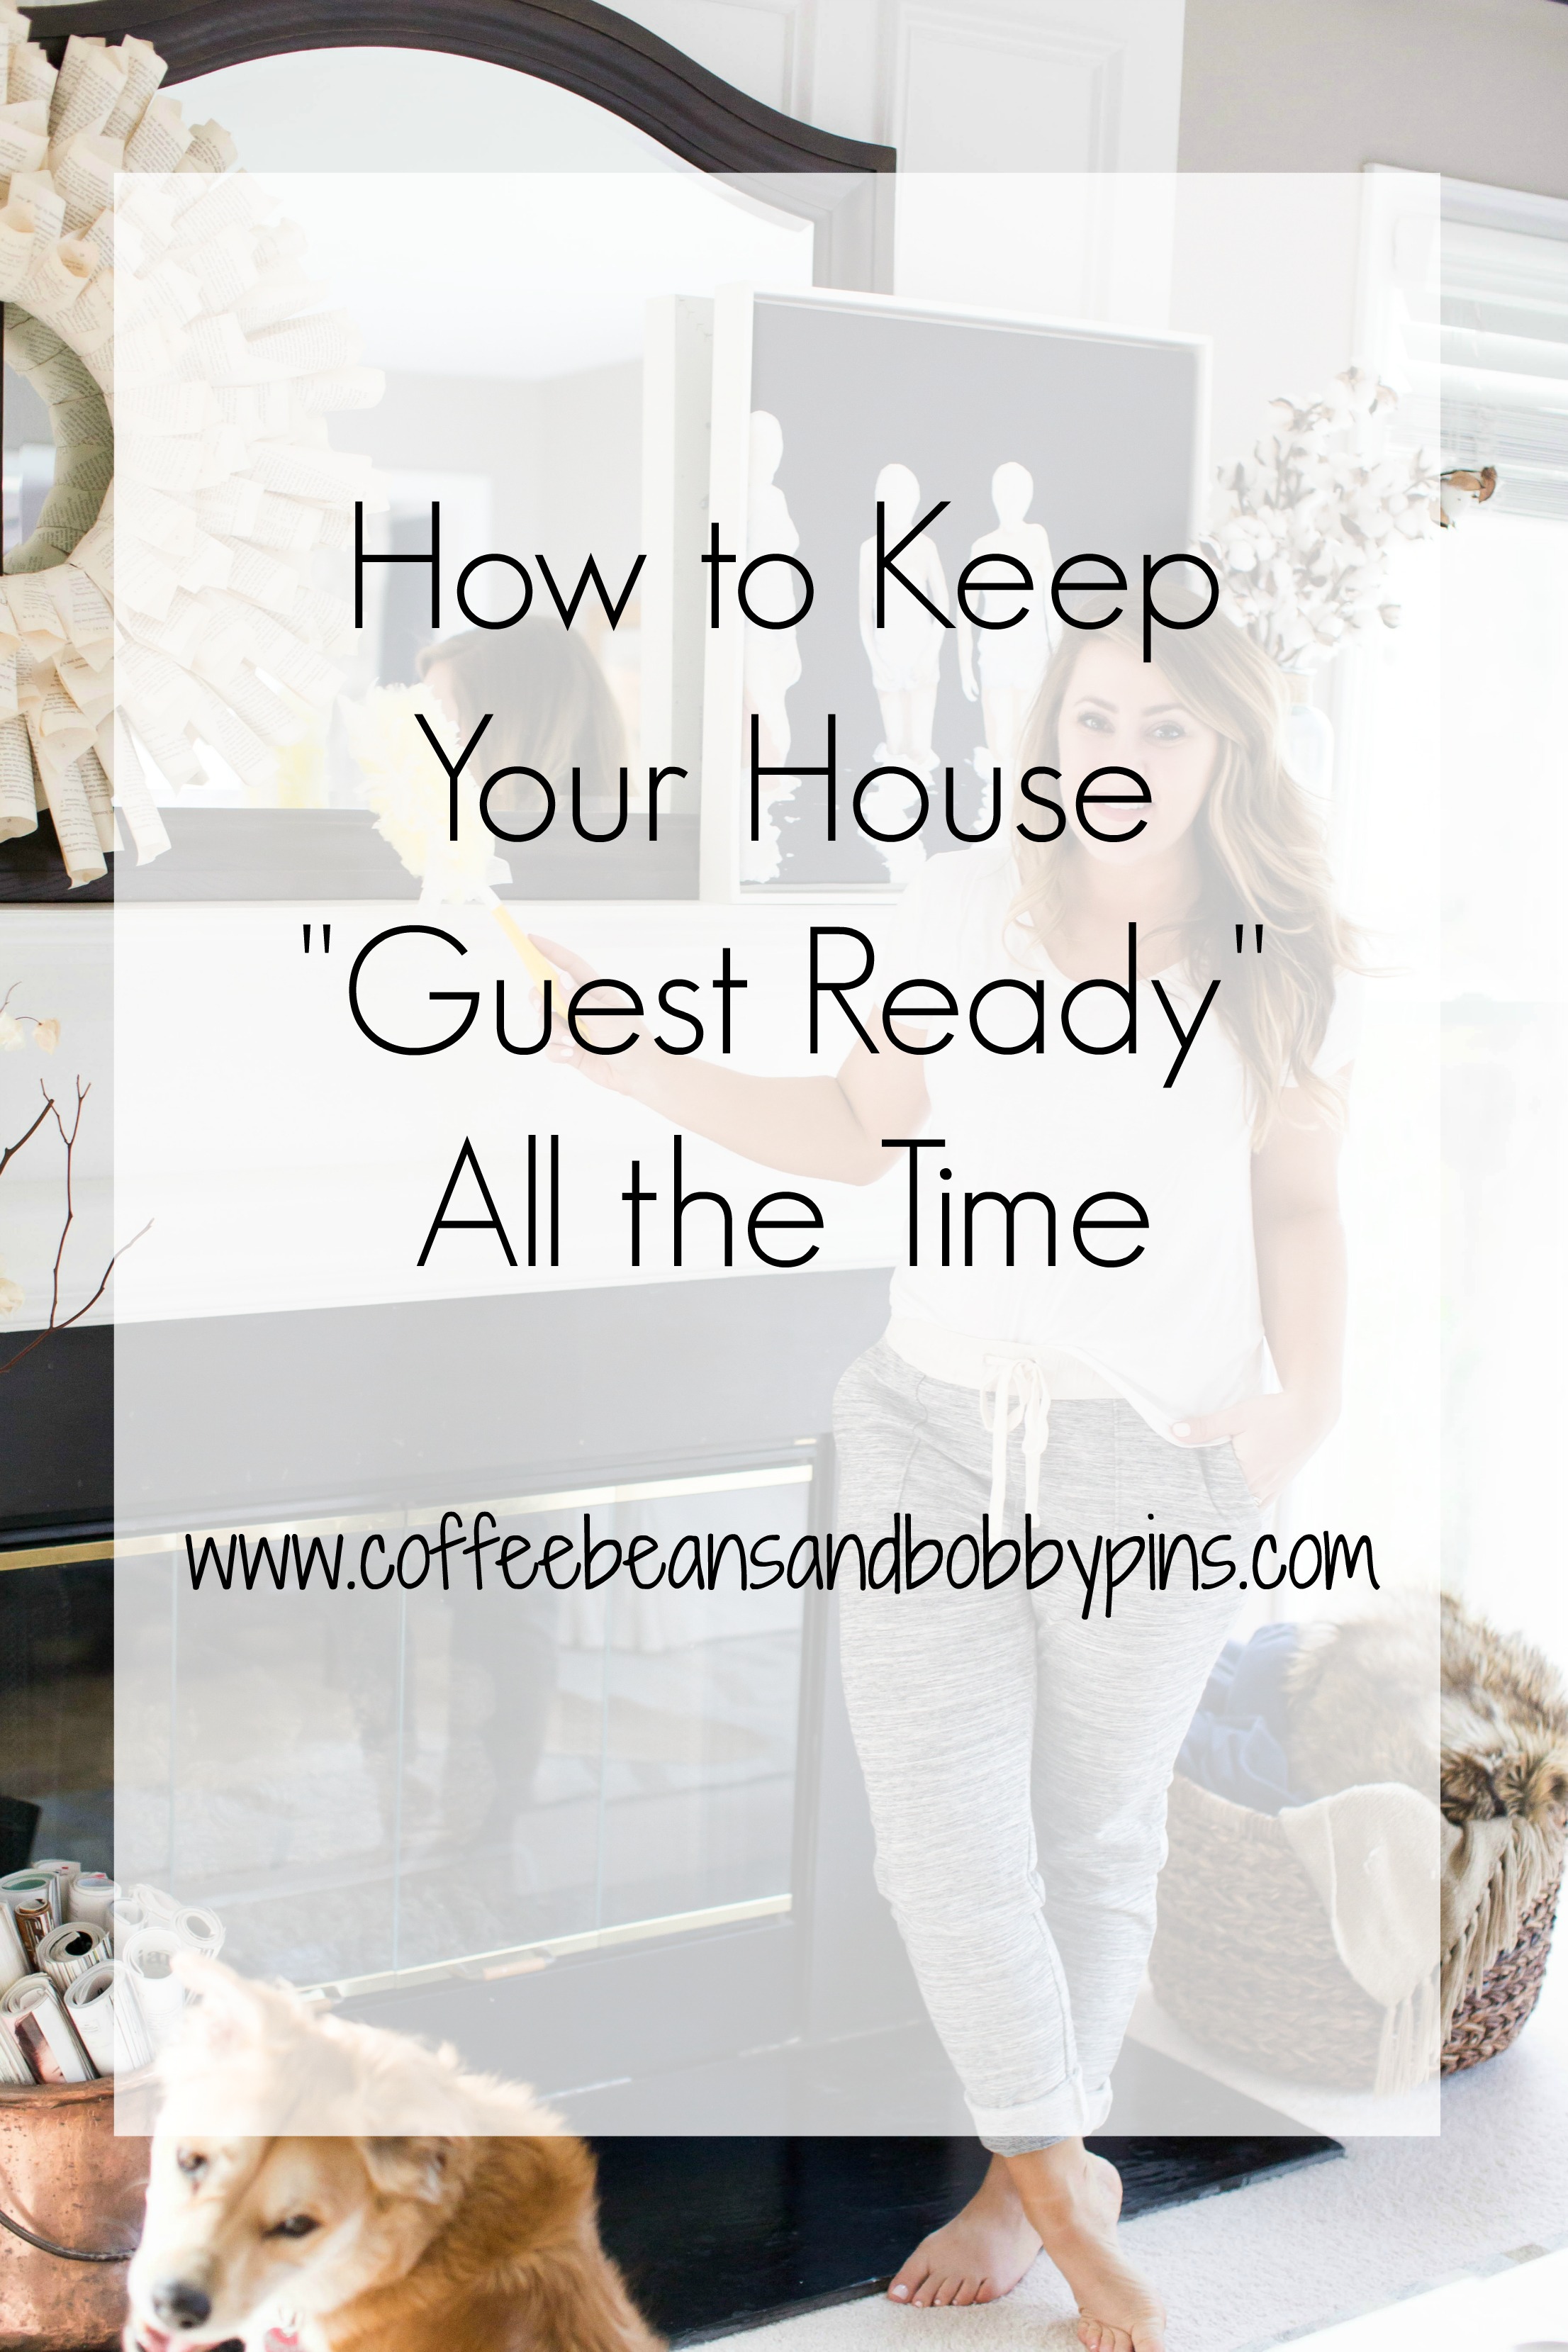 Keep Your House Clean & Guest Ready | How To | Coffee Beans and Bobby Pins